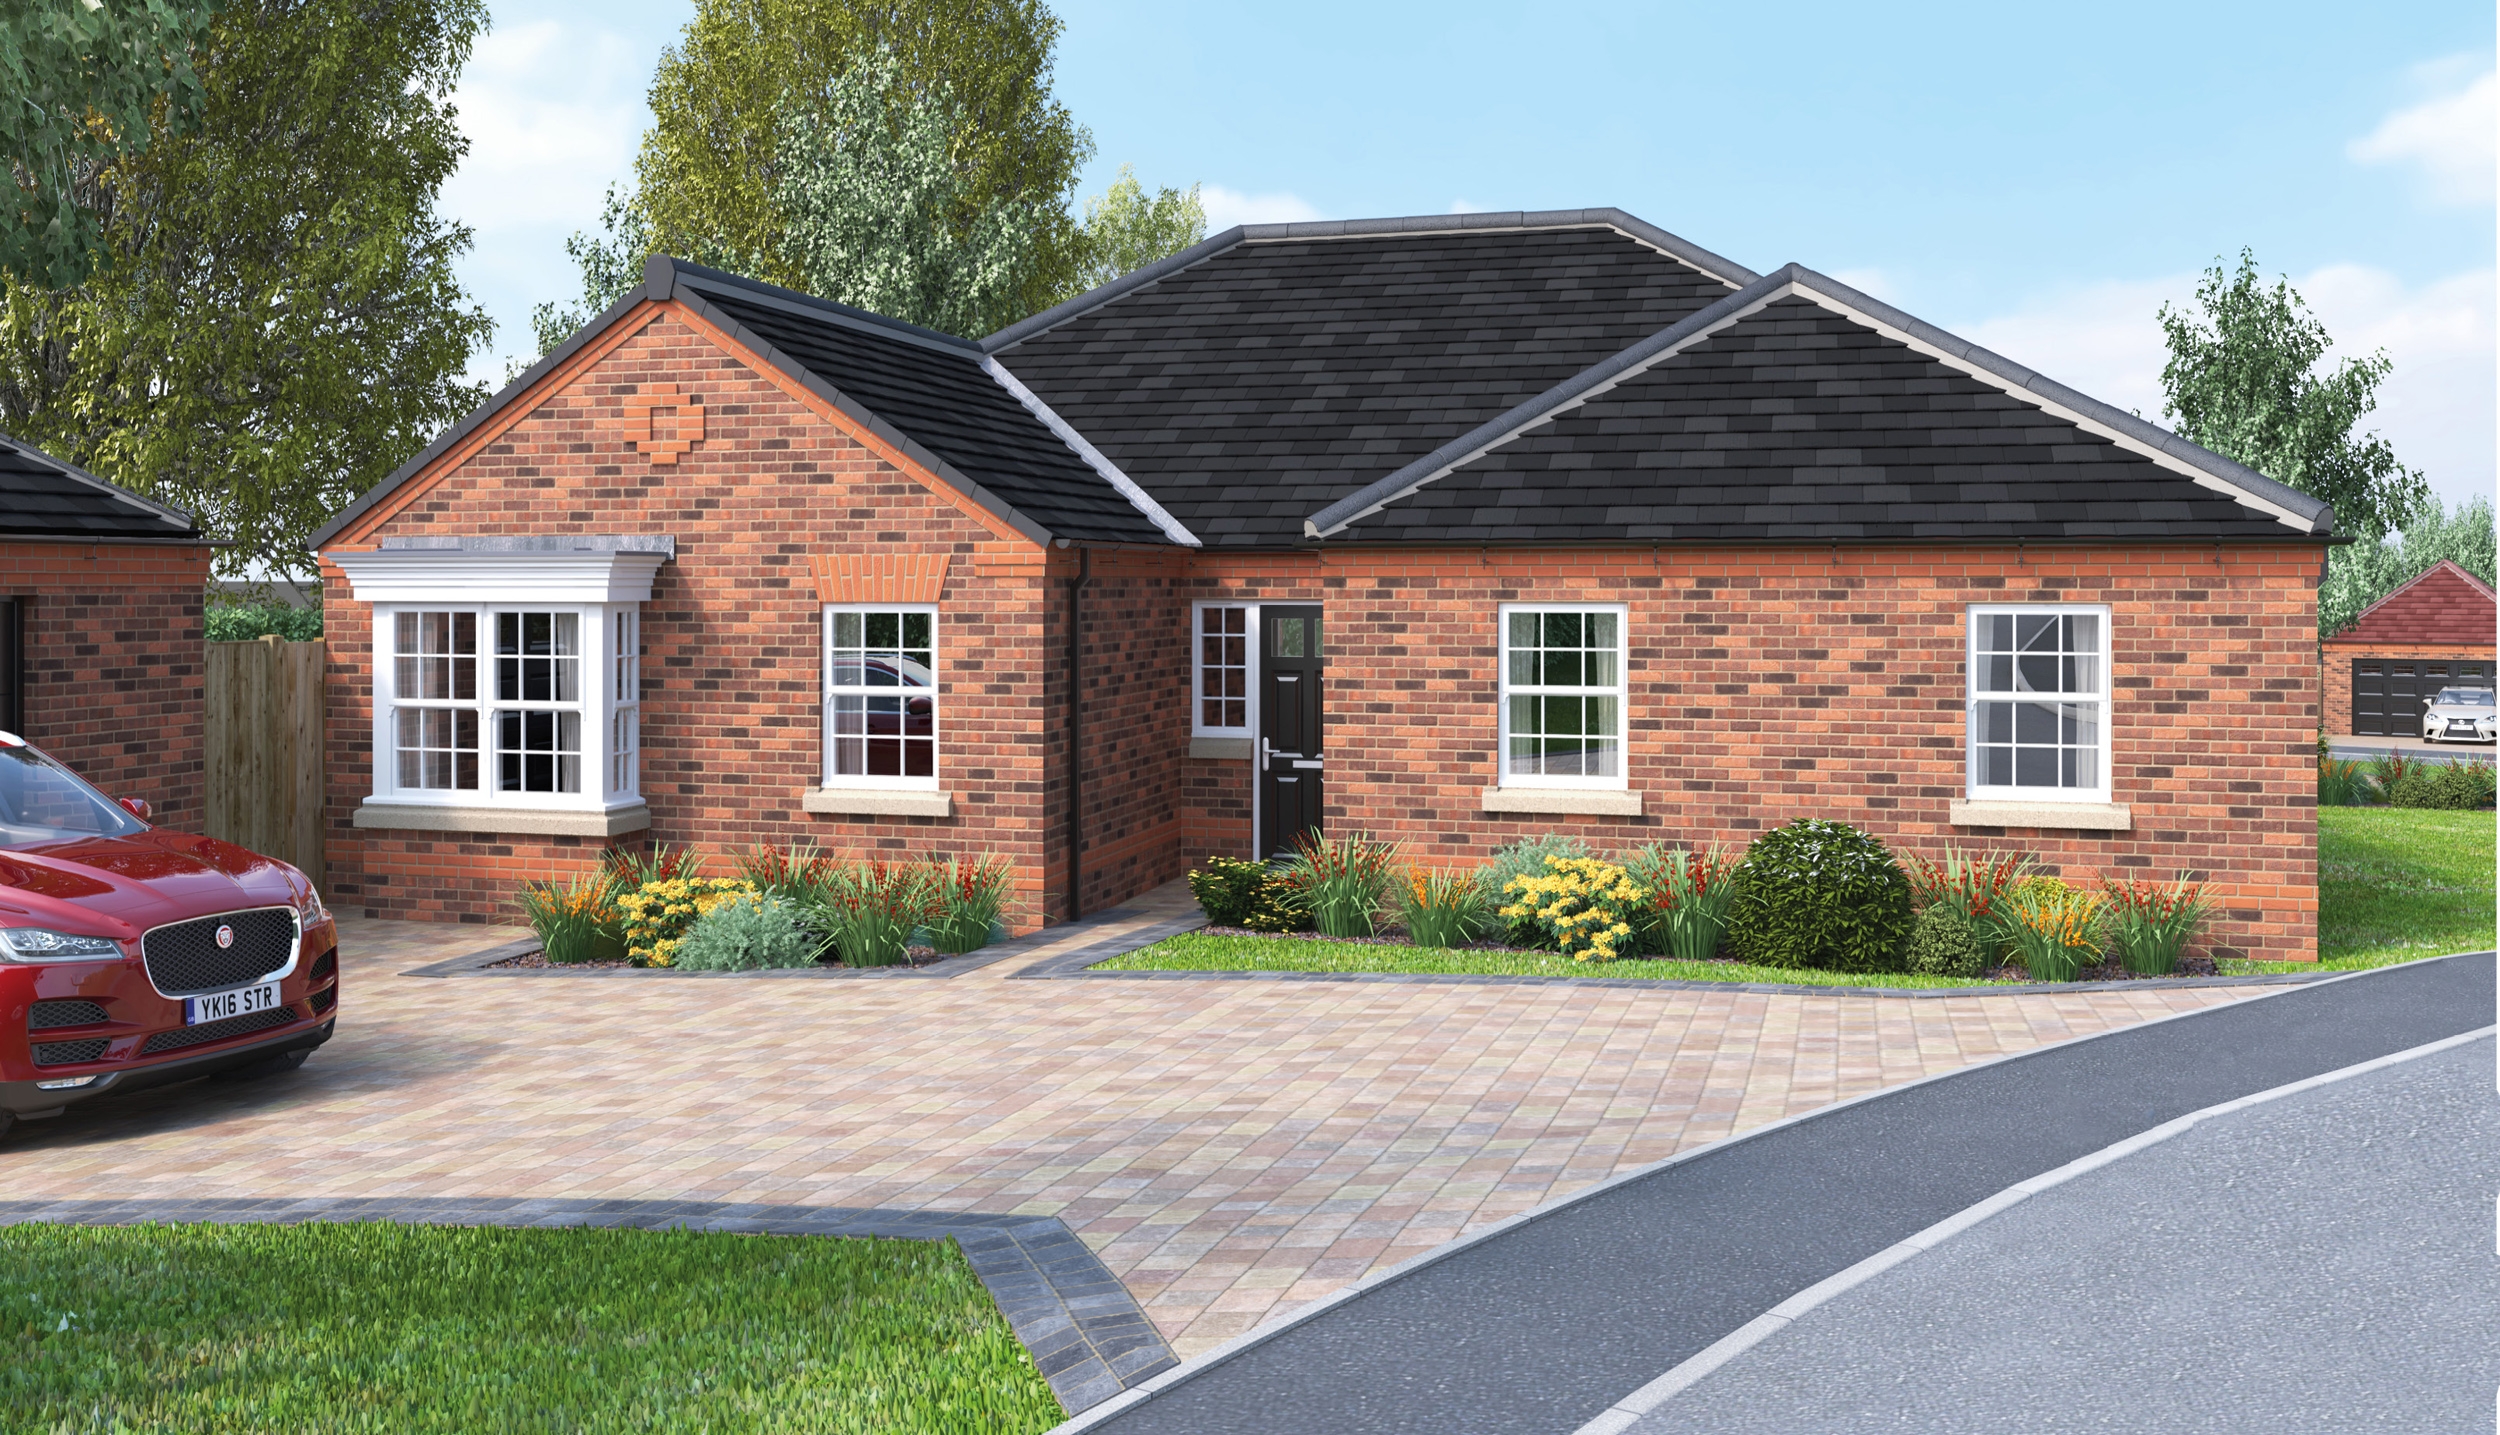 Luxury bungalow show home set to open soon at Ranskill